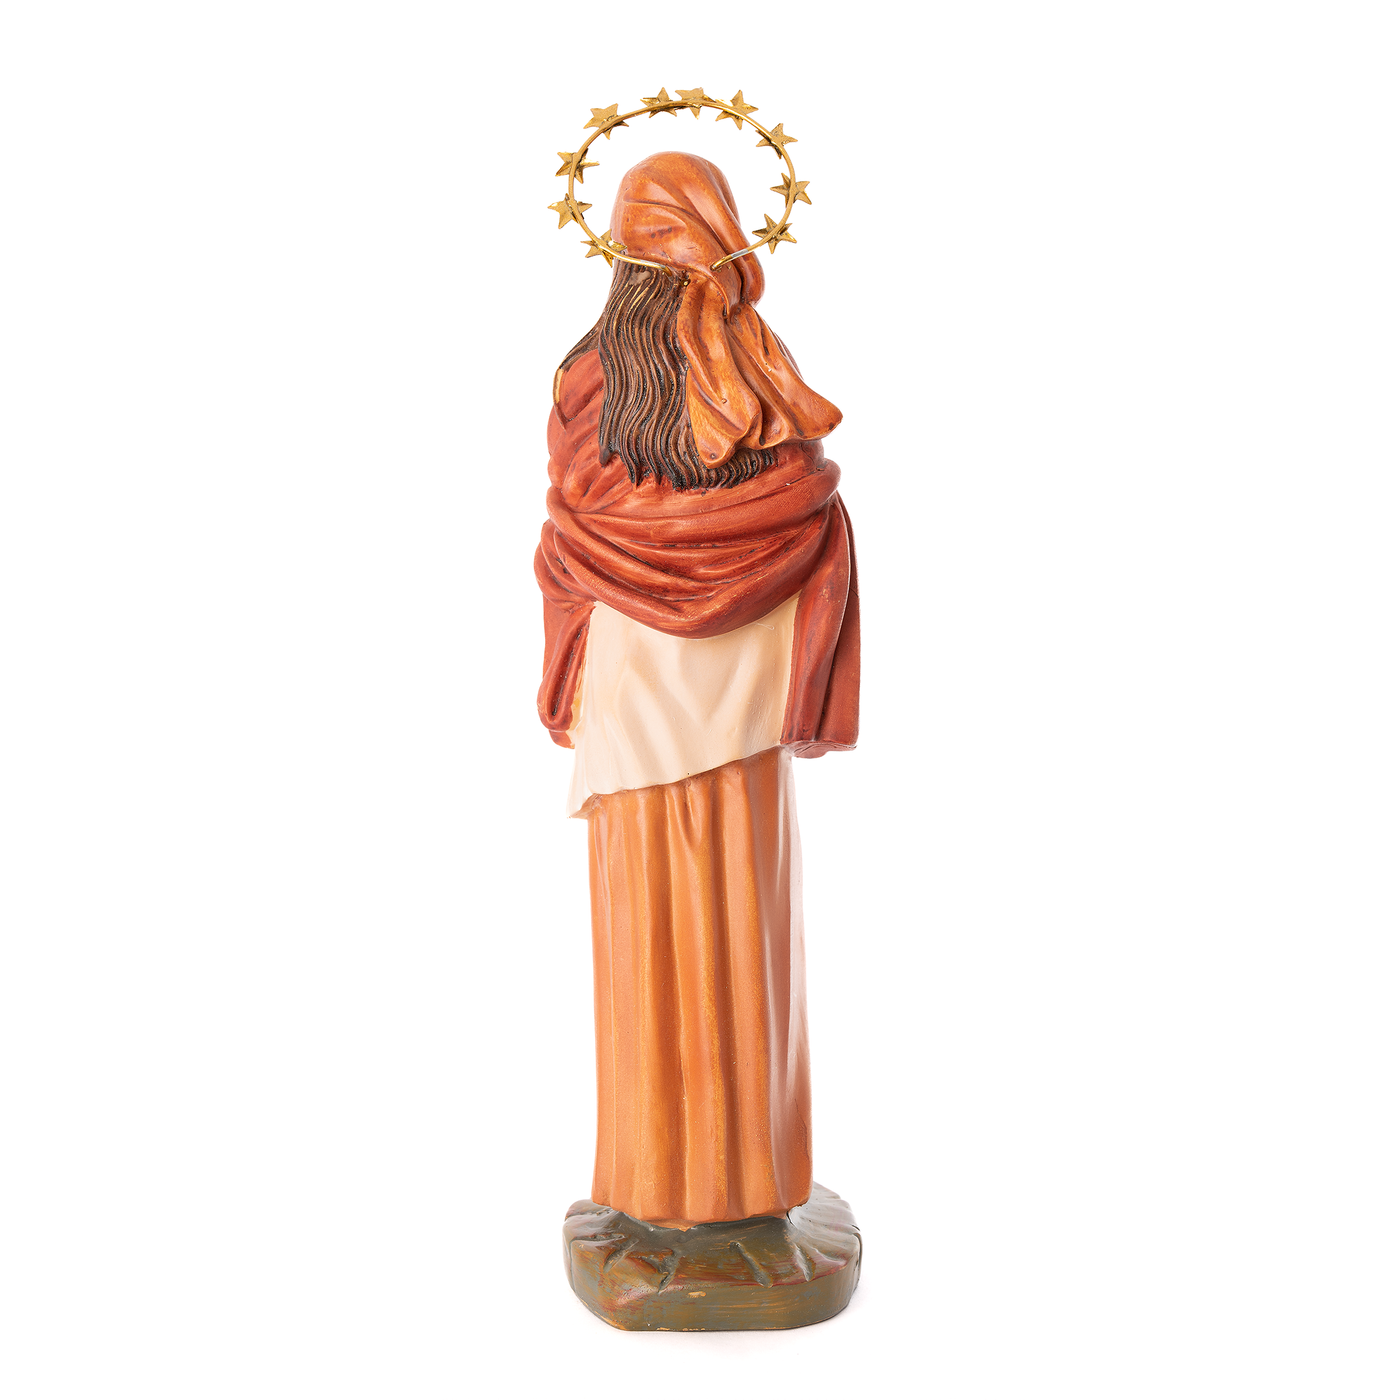 Figurine of Pregnant Virgin Mary - color